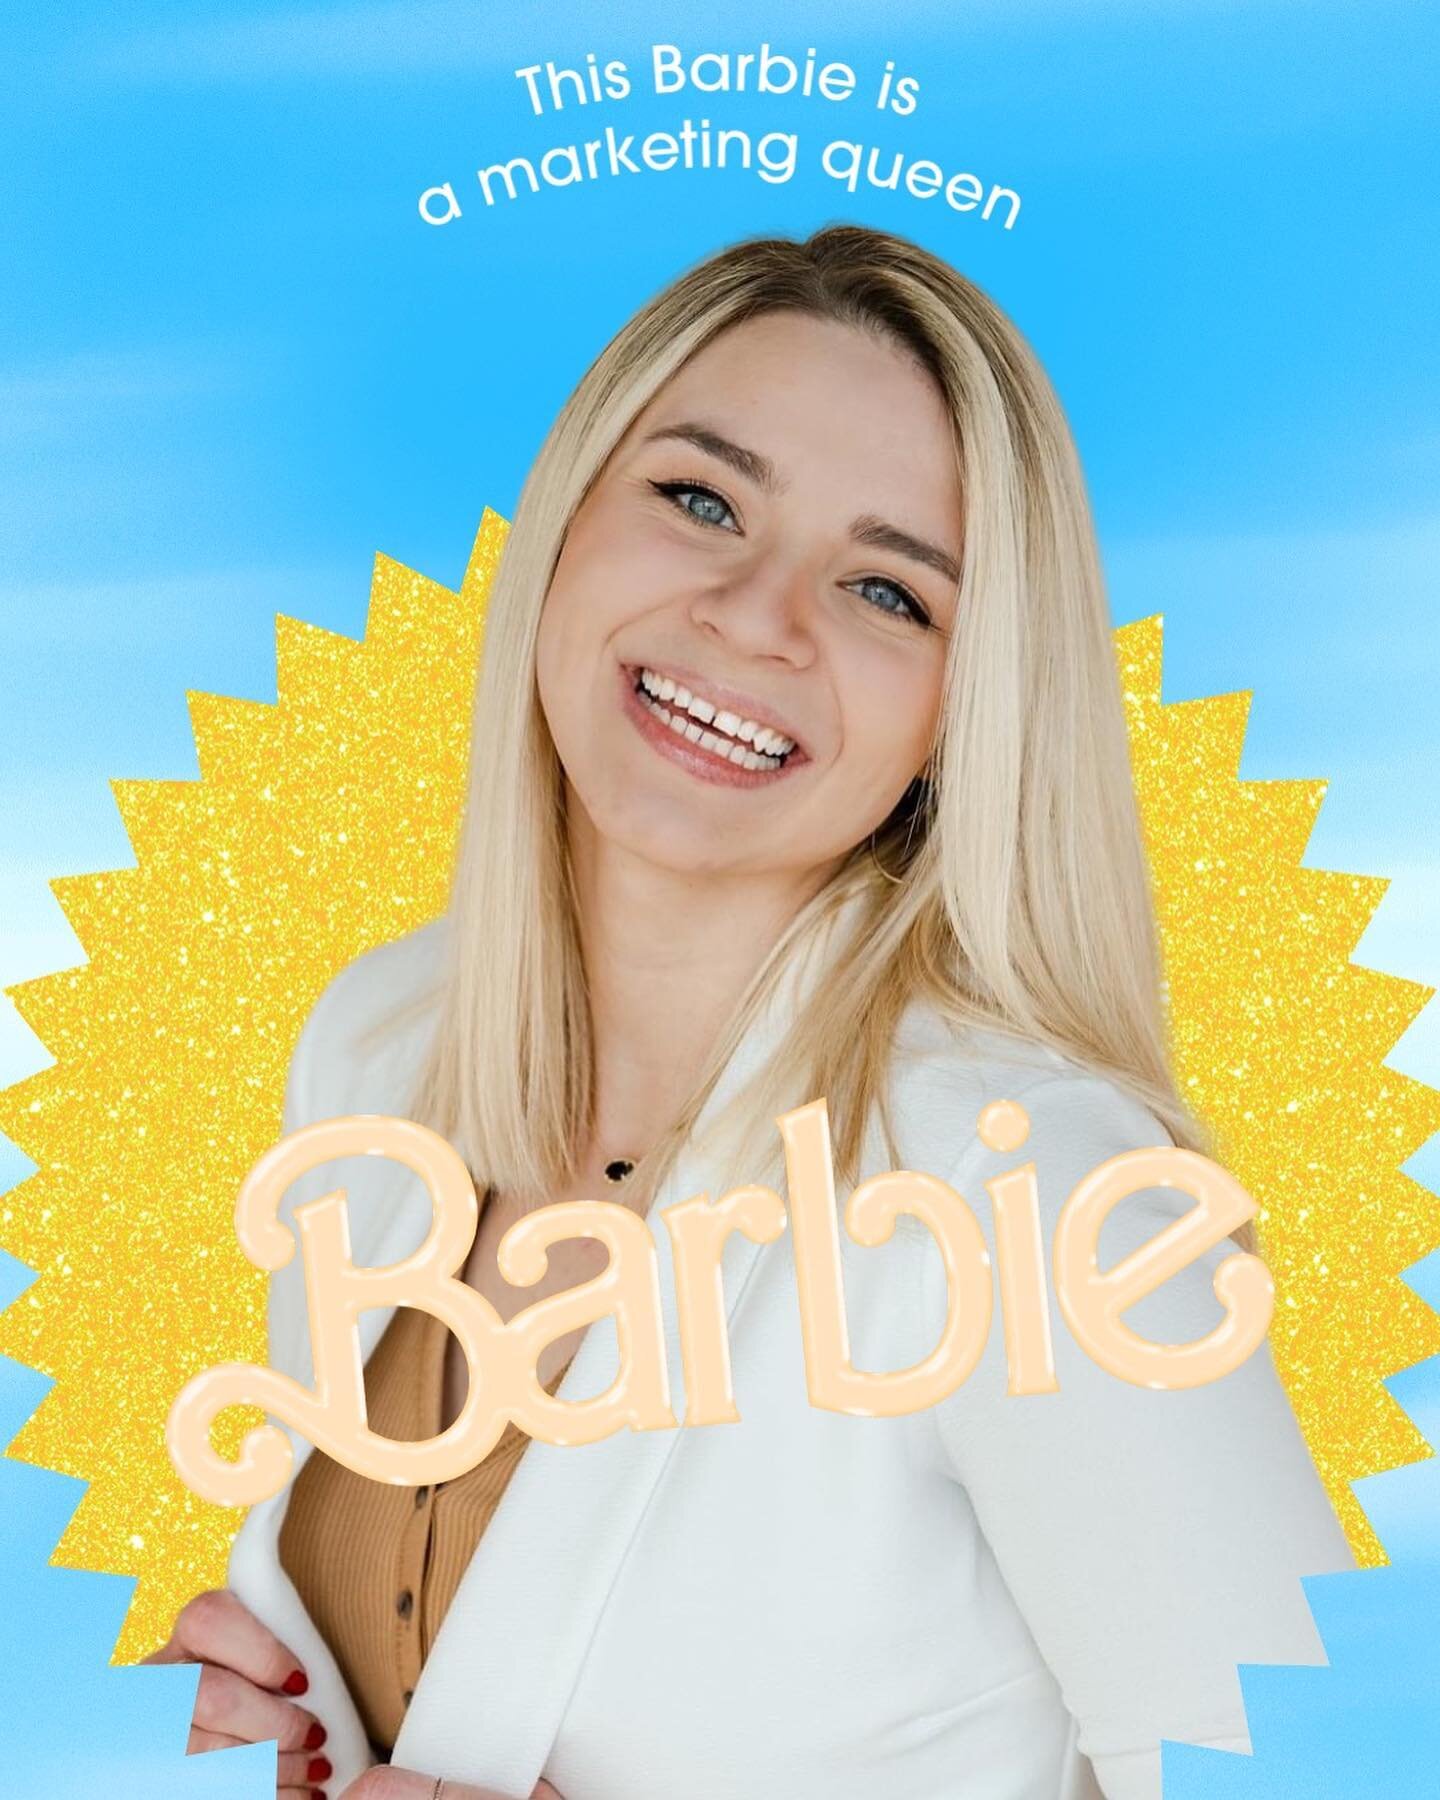 We could all take a lesson from the Barbie movie marketing campaign 😝 Meet your social Barbies ✨ 

#socialmediamarketing #barbiemarketing #barbiethemovie #thesocialpaige #socialbarbies